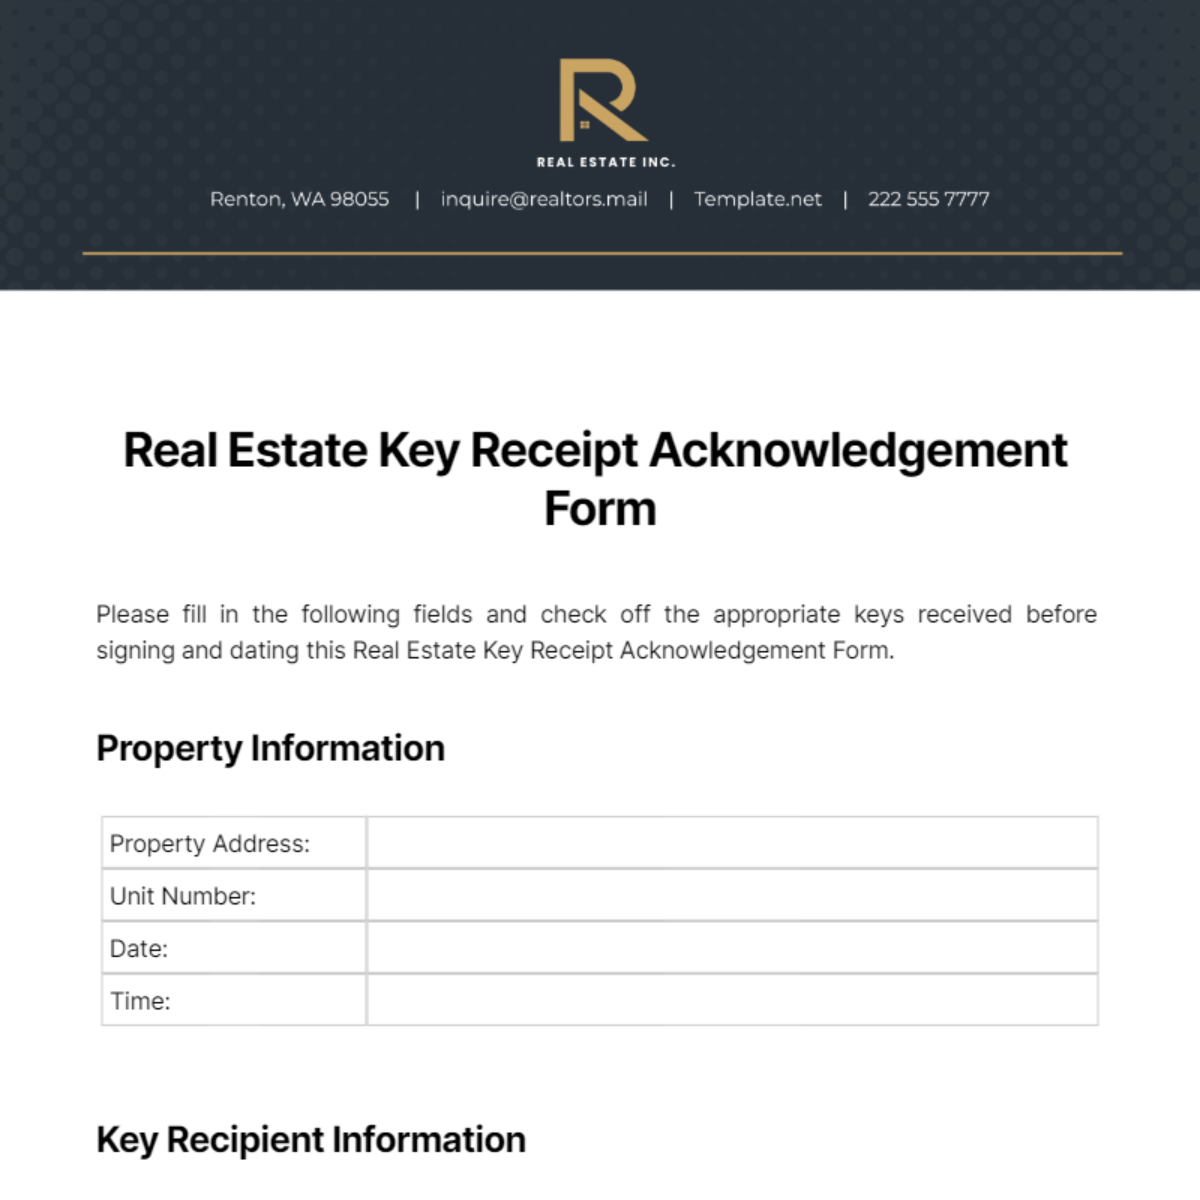 Real Estate Key Receipt Acknowledgement Form Template